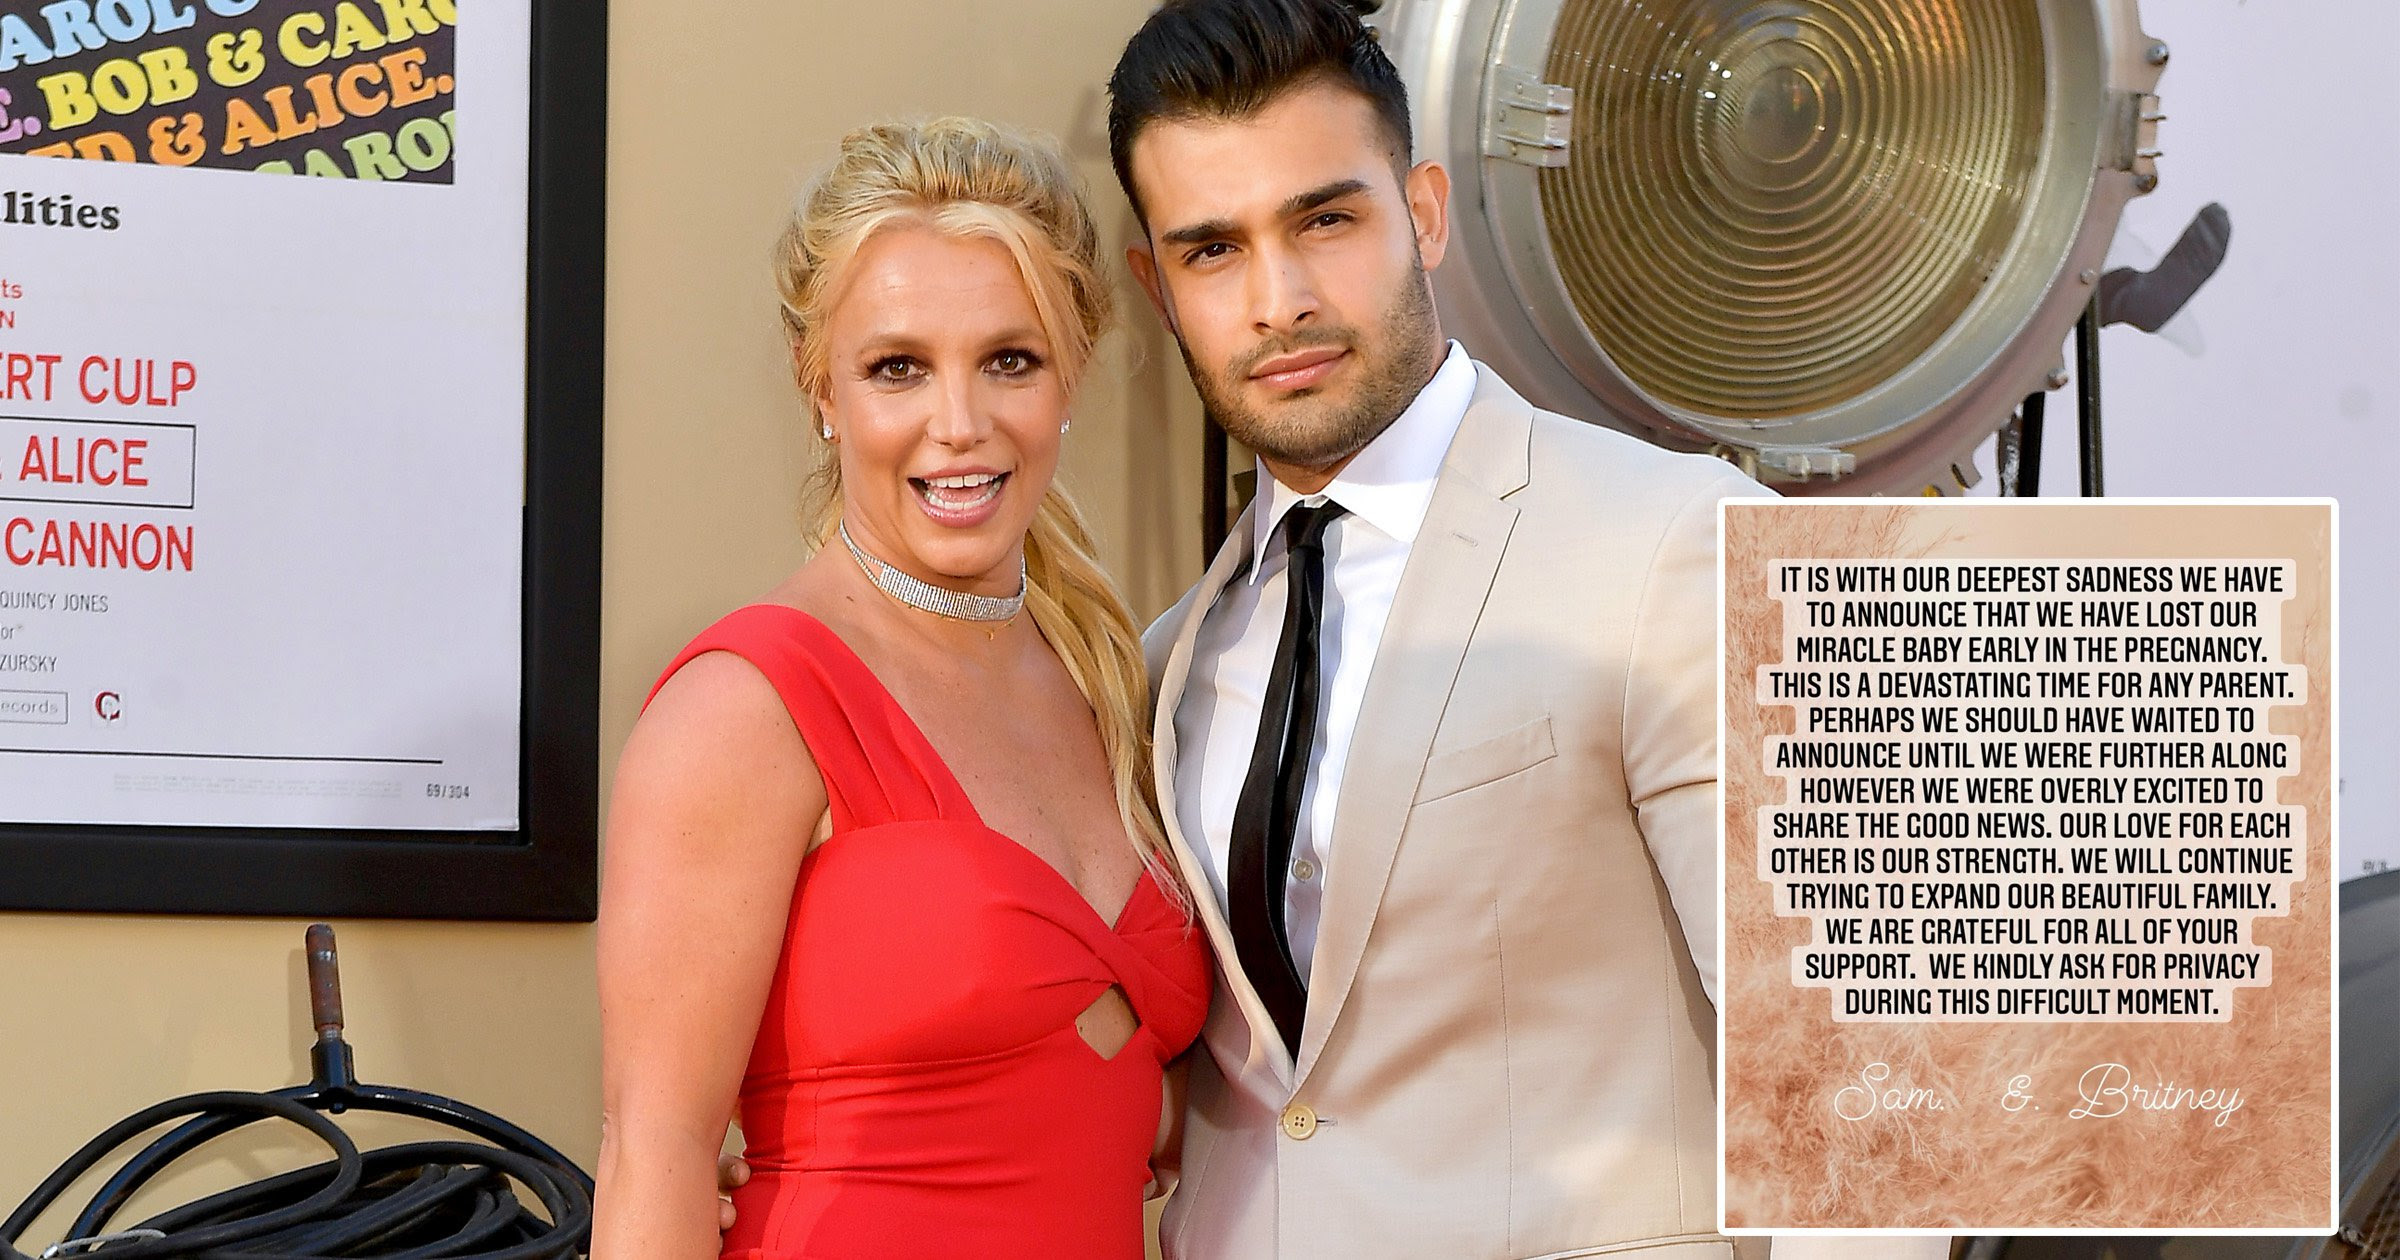 Britney Spears 'devastated' as she announces miscarriage